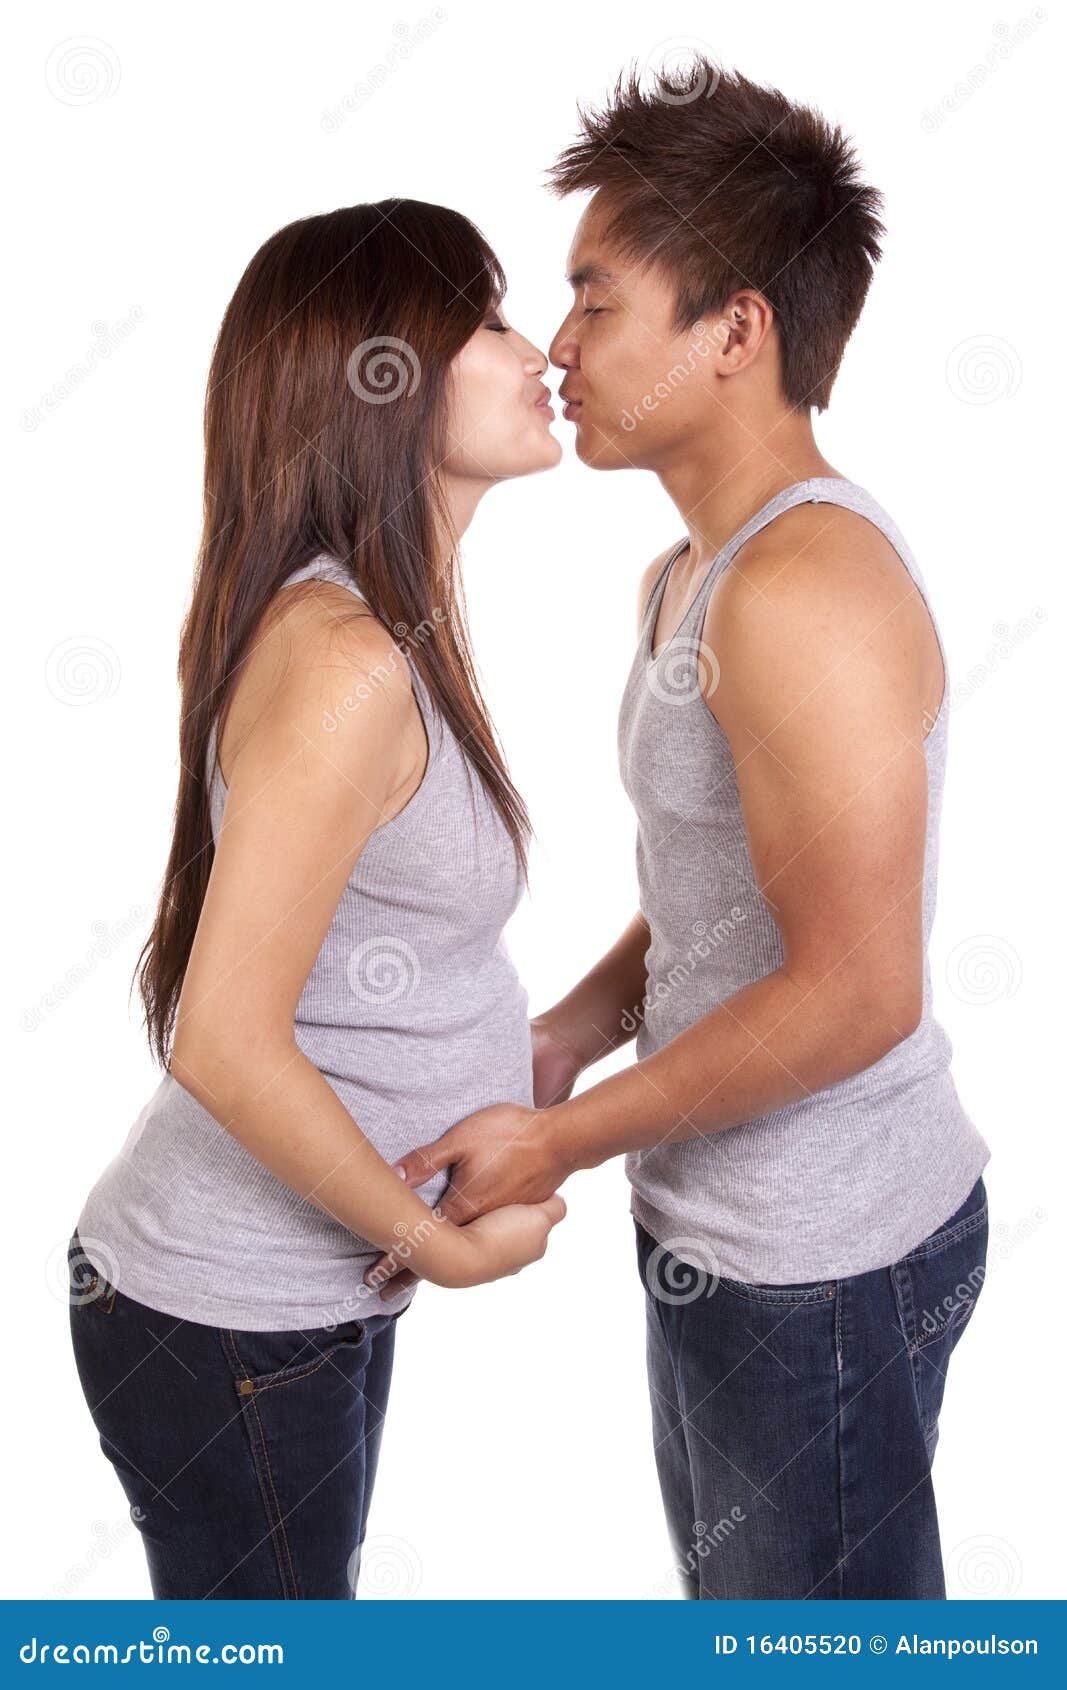 How To Kiss Asian 7